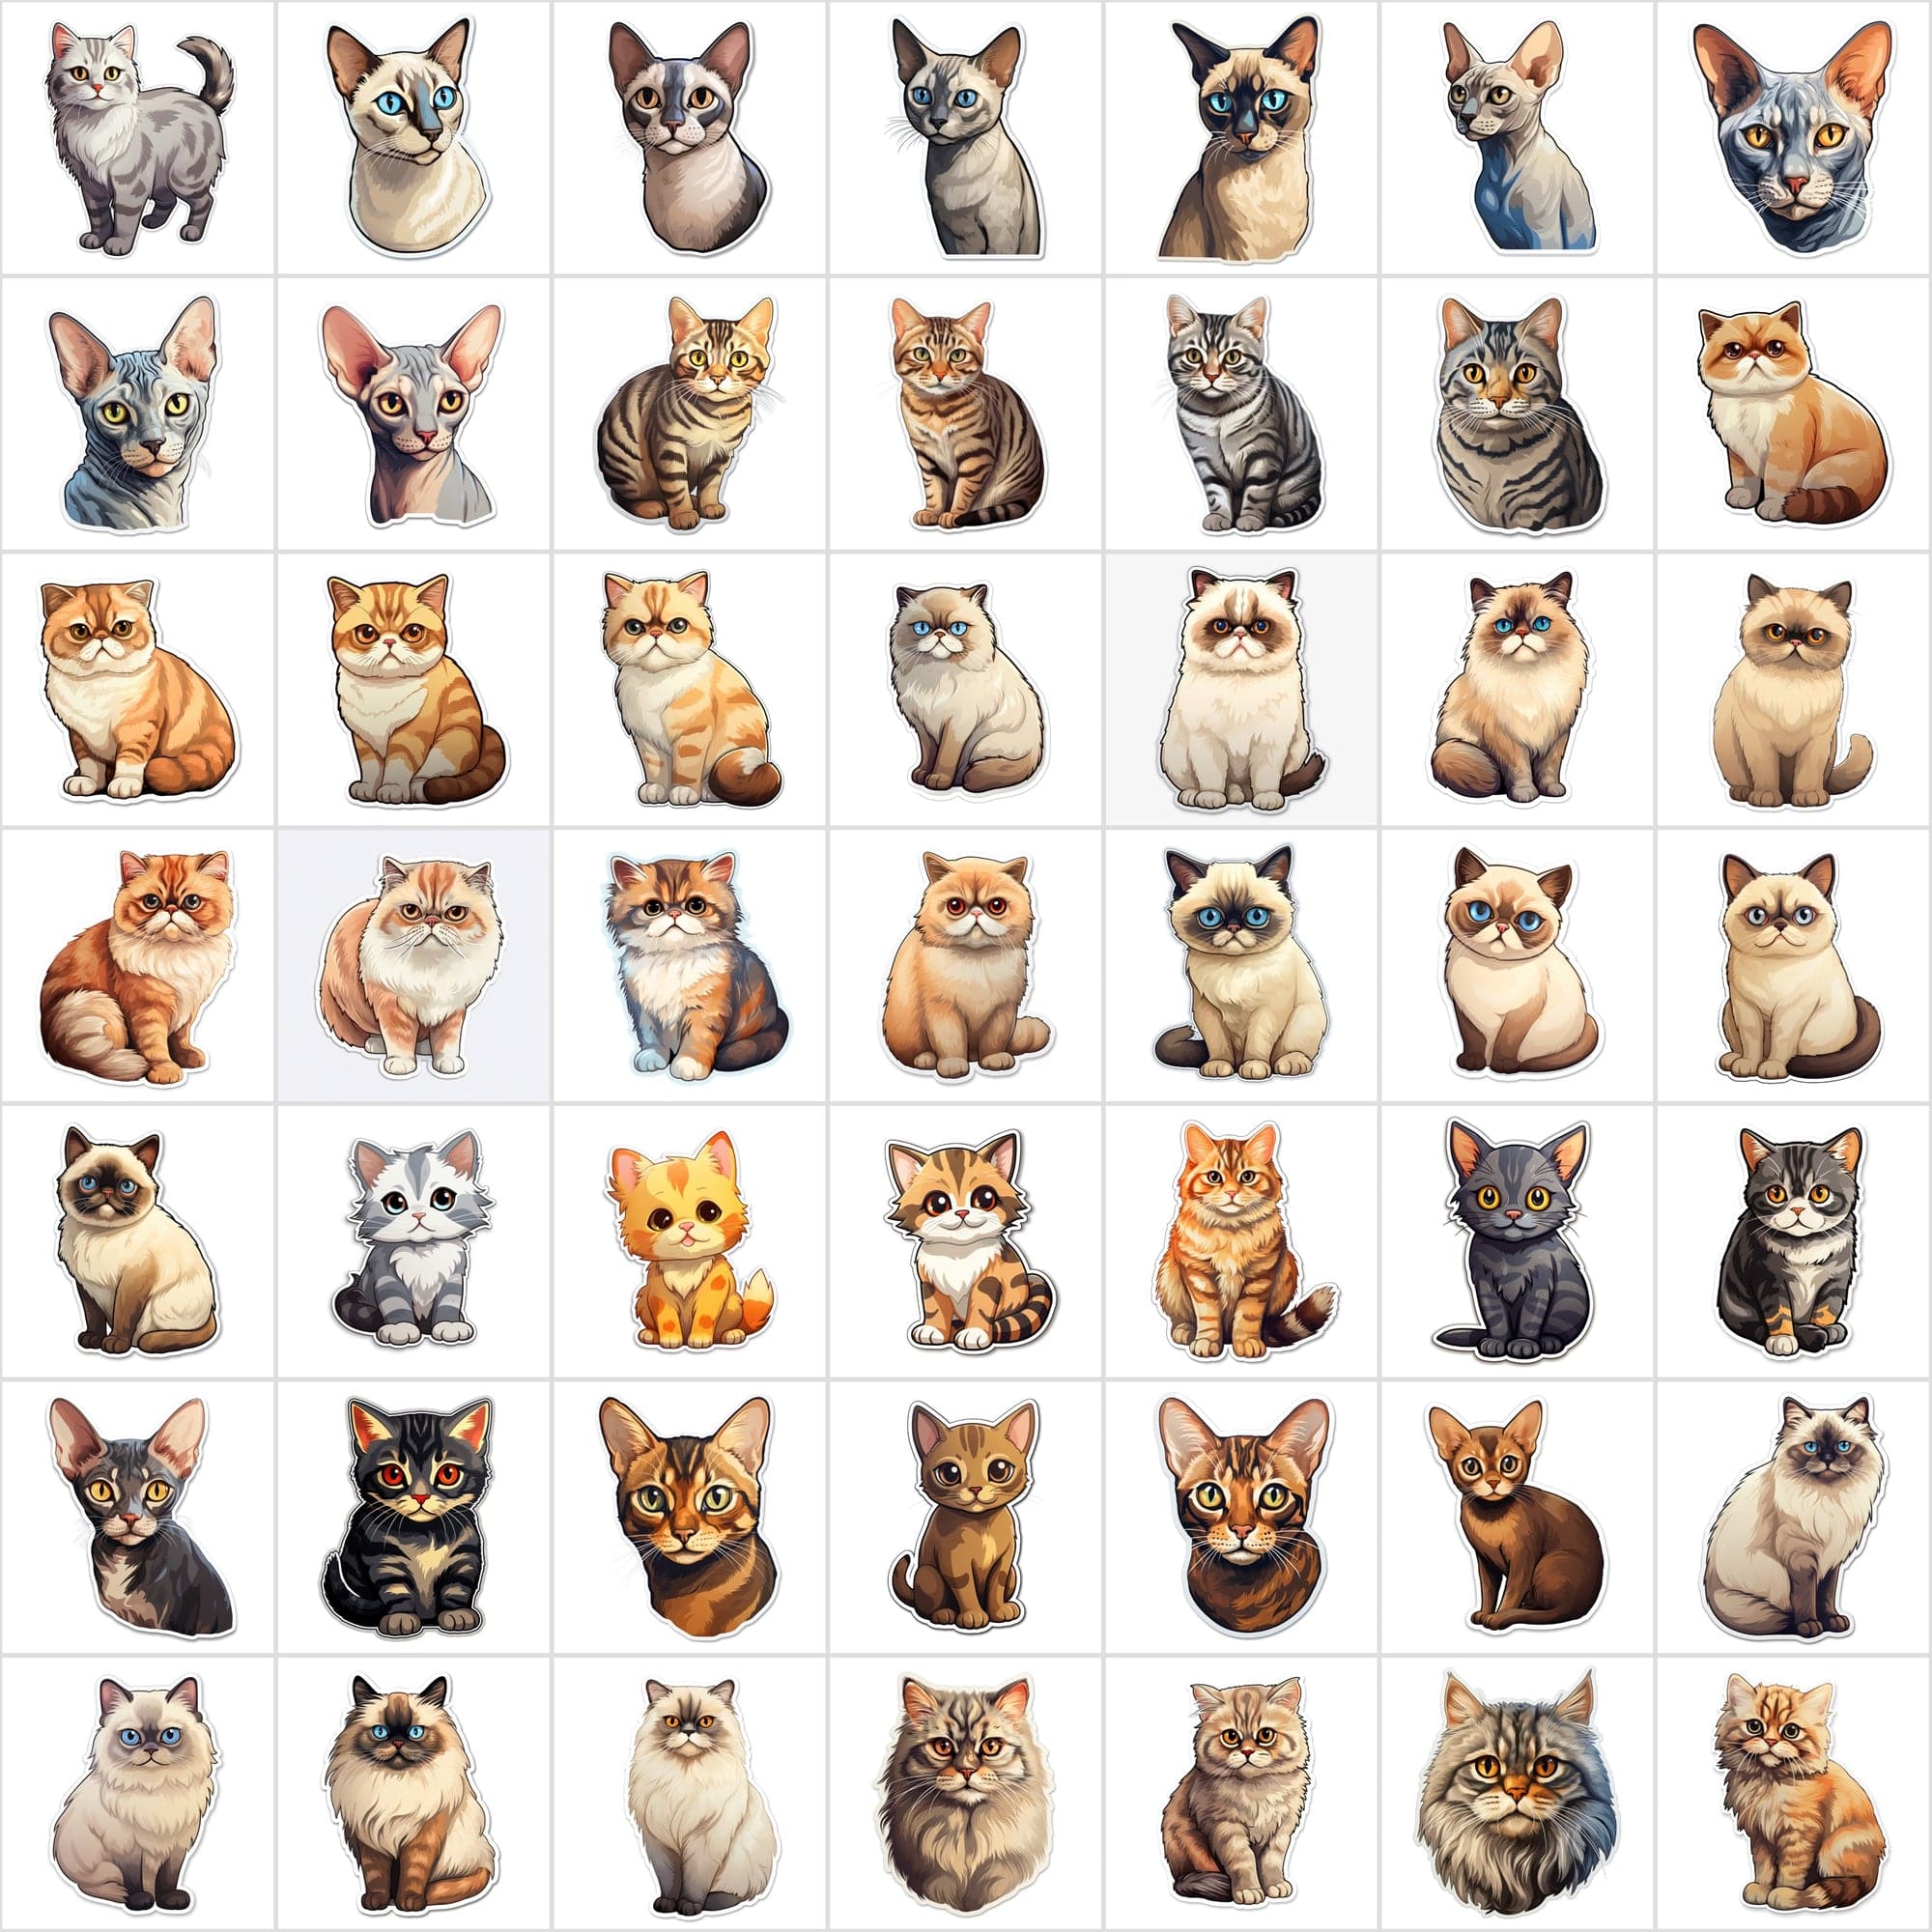 800 High-Res Cat Stickers, PNG Files, Transparent & White Background, Commercial License Included Digital Download Sumobundle